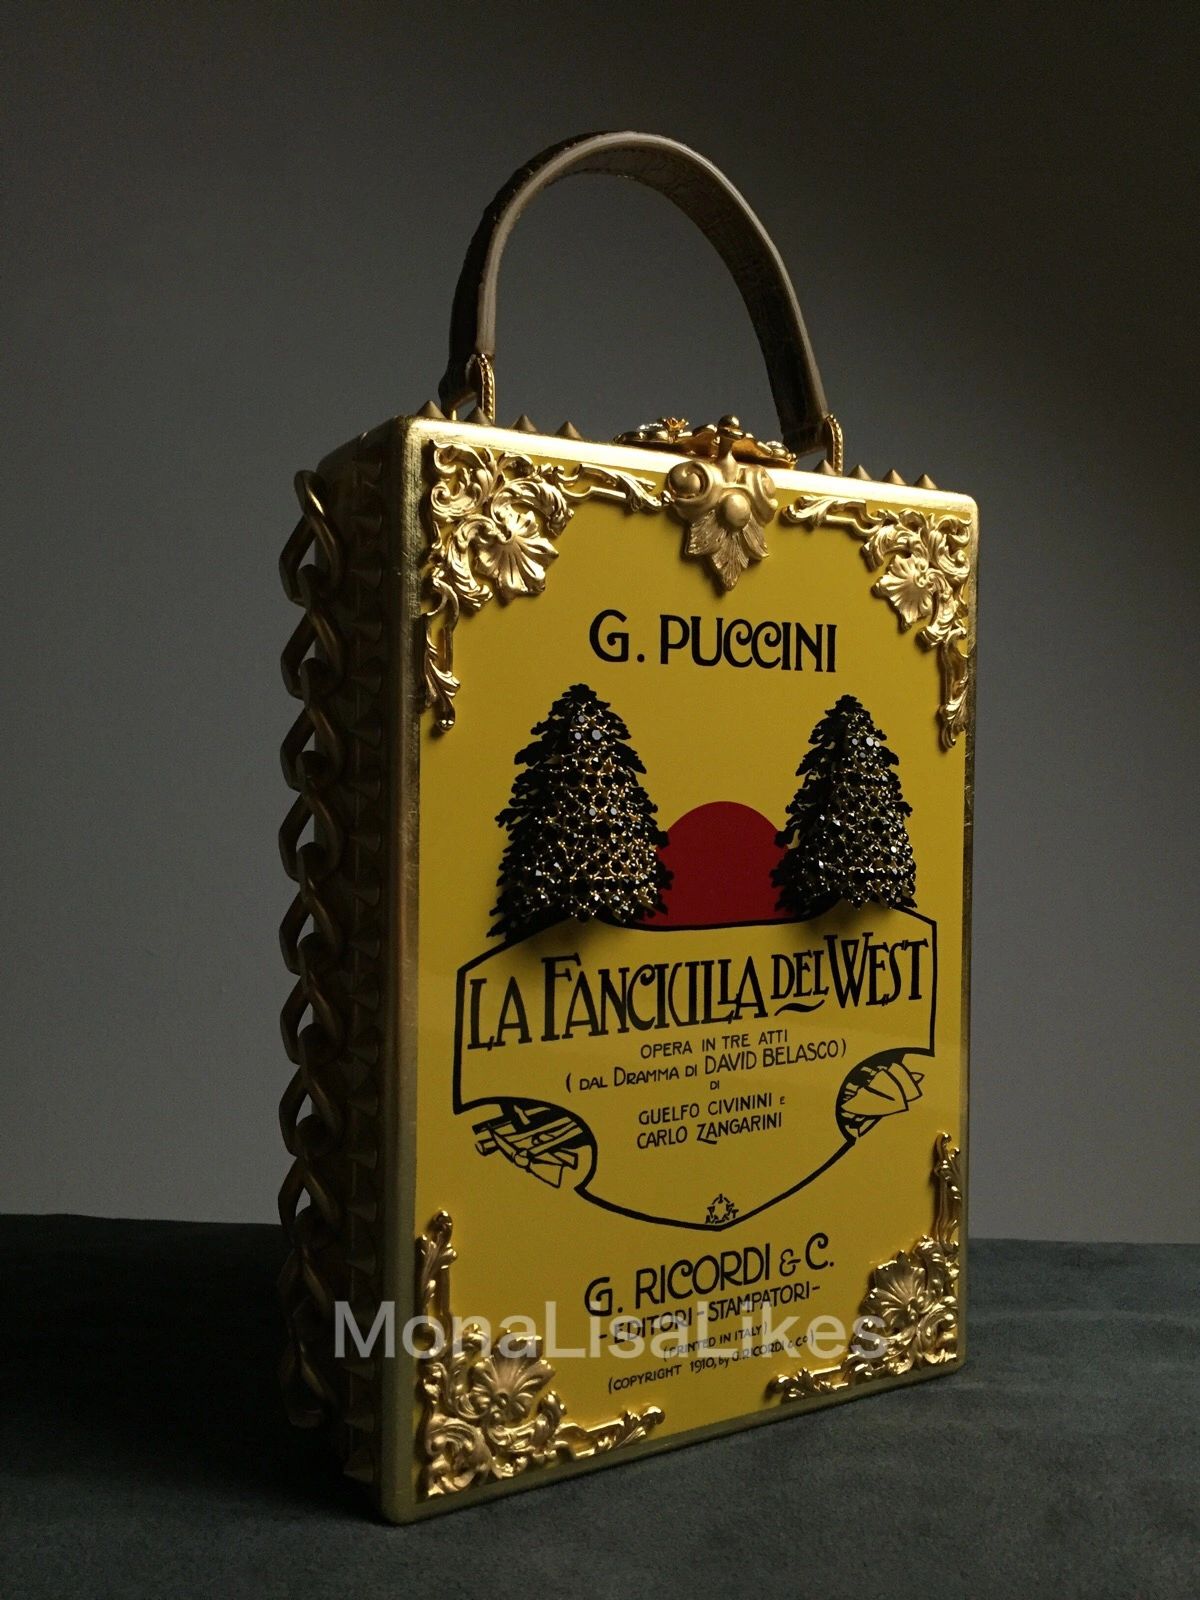 DOLCE & GABBANA Puccini Poster Box Bag from ALTA MODA collection was never sold in stores. It was distributed only between specially invited guests invited to DOLCE & GABBANA ALTA MODA show in La Scala